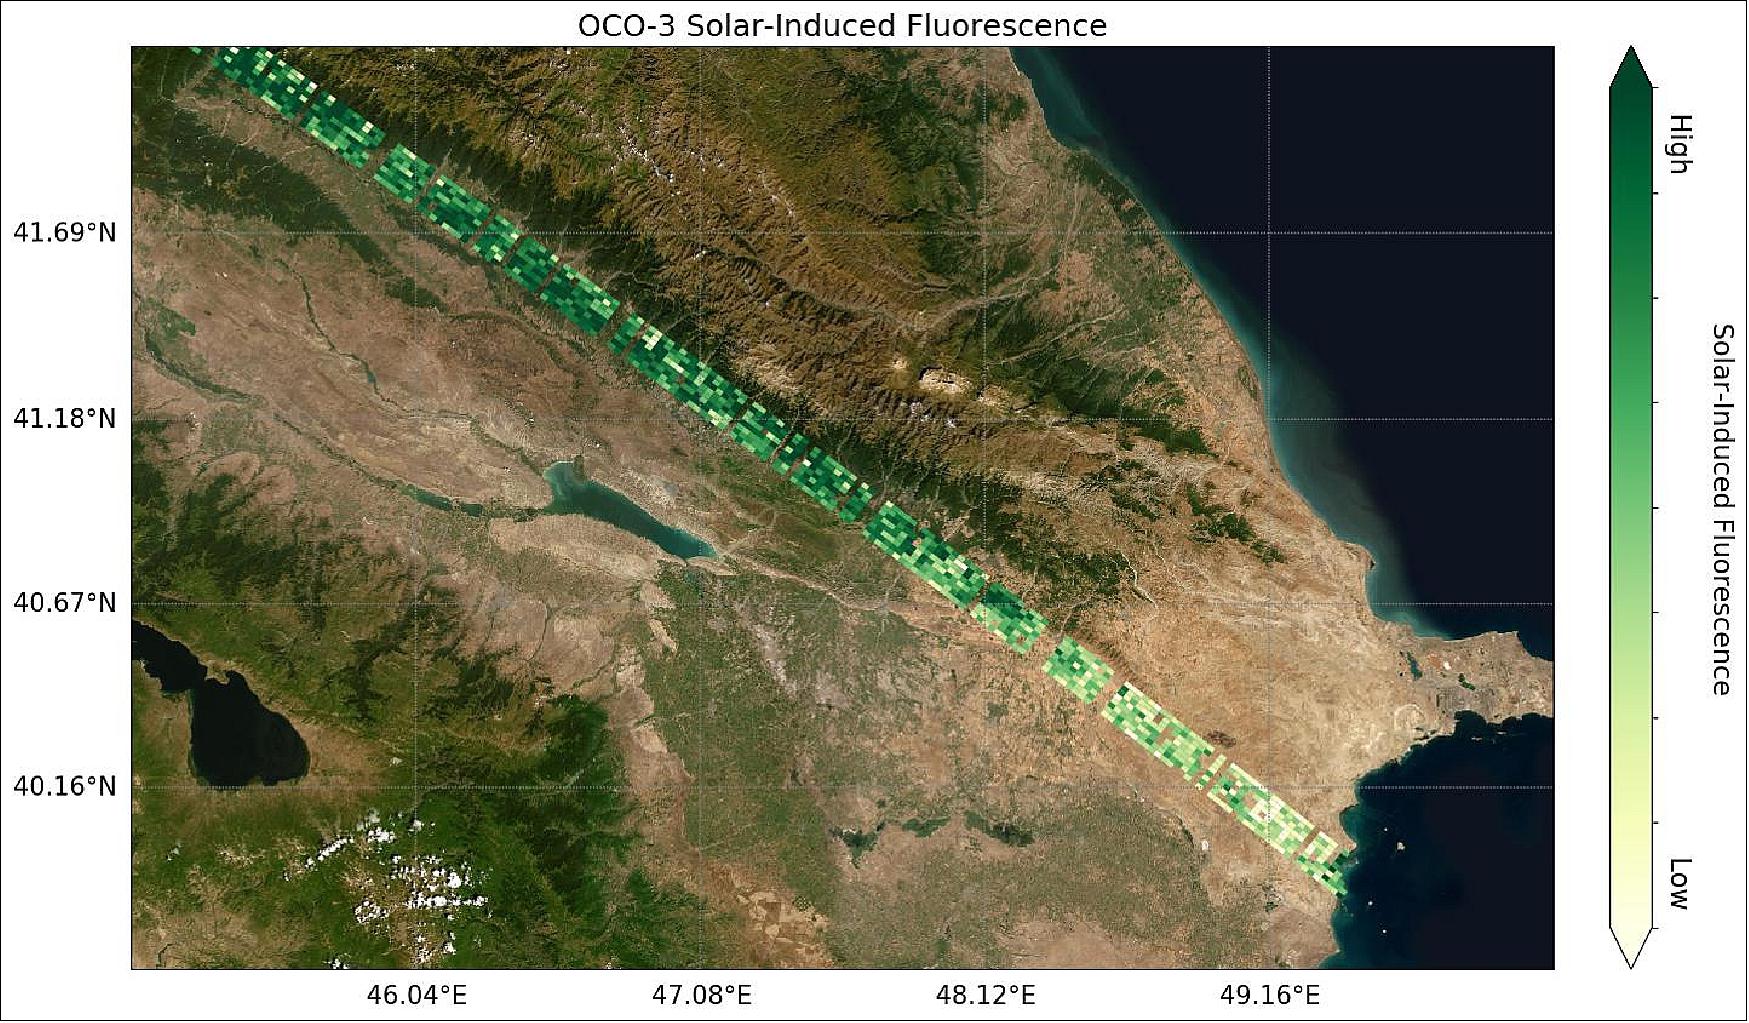 Figure 11: This image shows OCO-3's first preliminary SIF (Solar-Induced Fluorescence) measurements over western Asia. SIF is the glow plants emit from photosynthesis — the process of plant growth that includes the capture of carbon from the atmosphere. Areas with lower photosynthesis activity are shown in light green; areas with higher photosynthesis activity are shown in dark green. As expected, there is significant contrast in plant activity from areas of low vegetation near the Caspian Sea to areas of more dense vegetation like the forests and farms north and east of the Mingachevir Reservoir (near the center of the image), image credit: NASA/JPL-Caltech